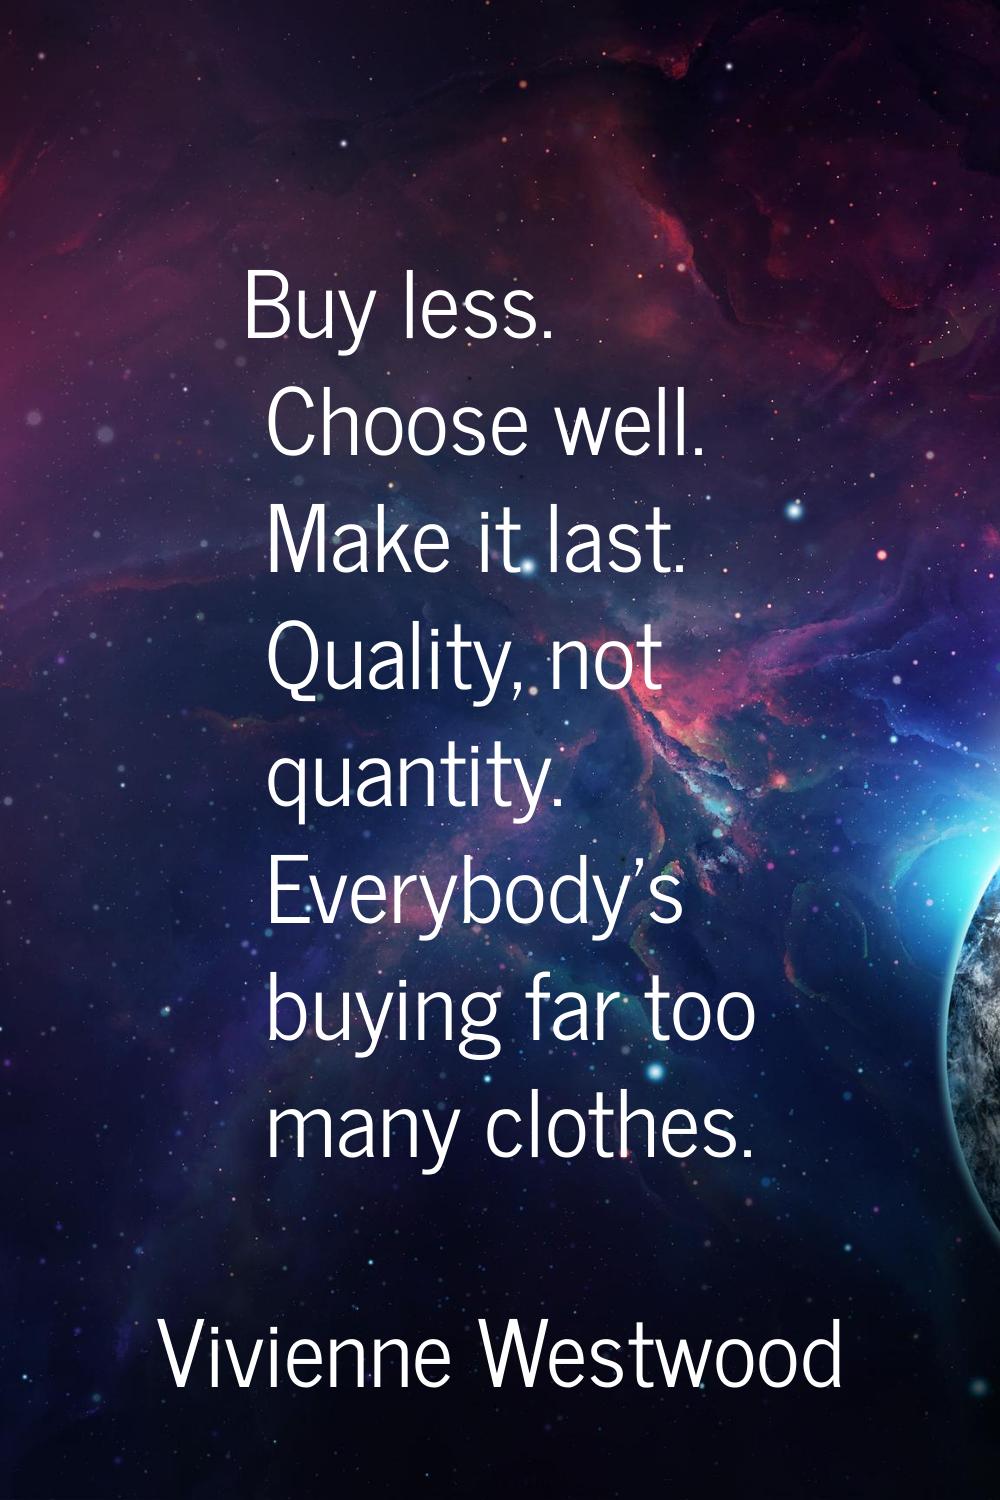 Buy less. Choose well. Make it last. Quality, not quantity. Everybody's buying far too many clothes